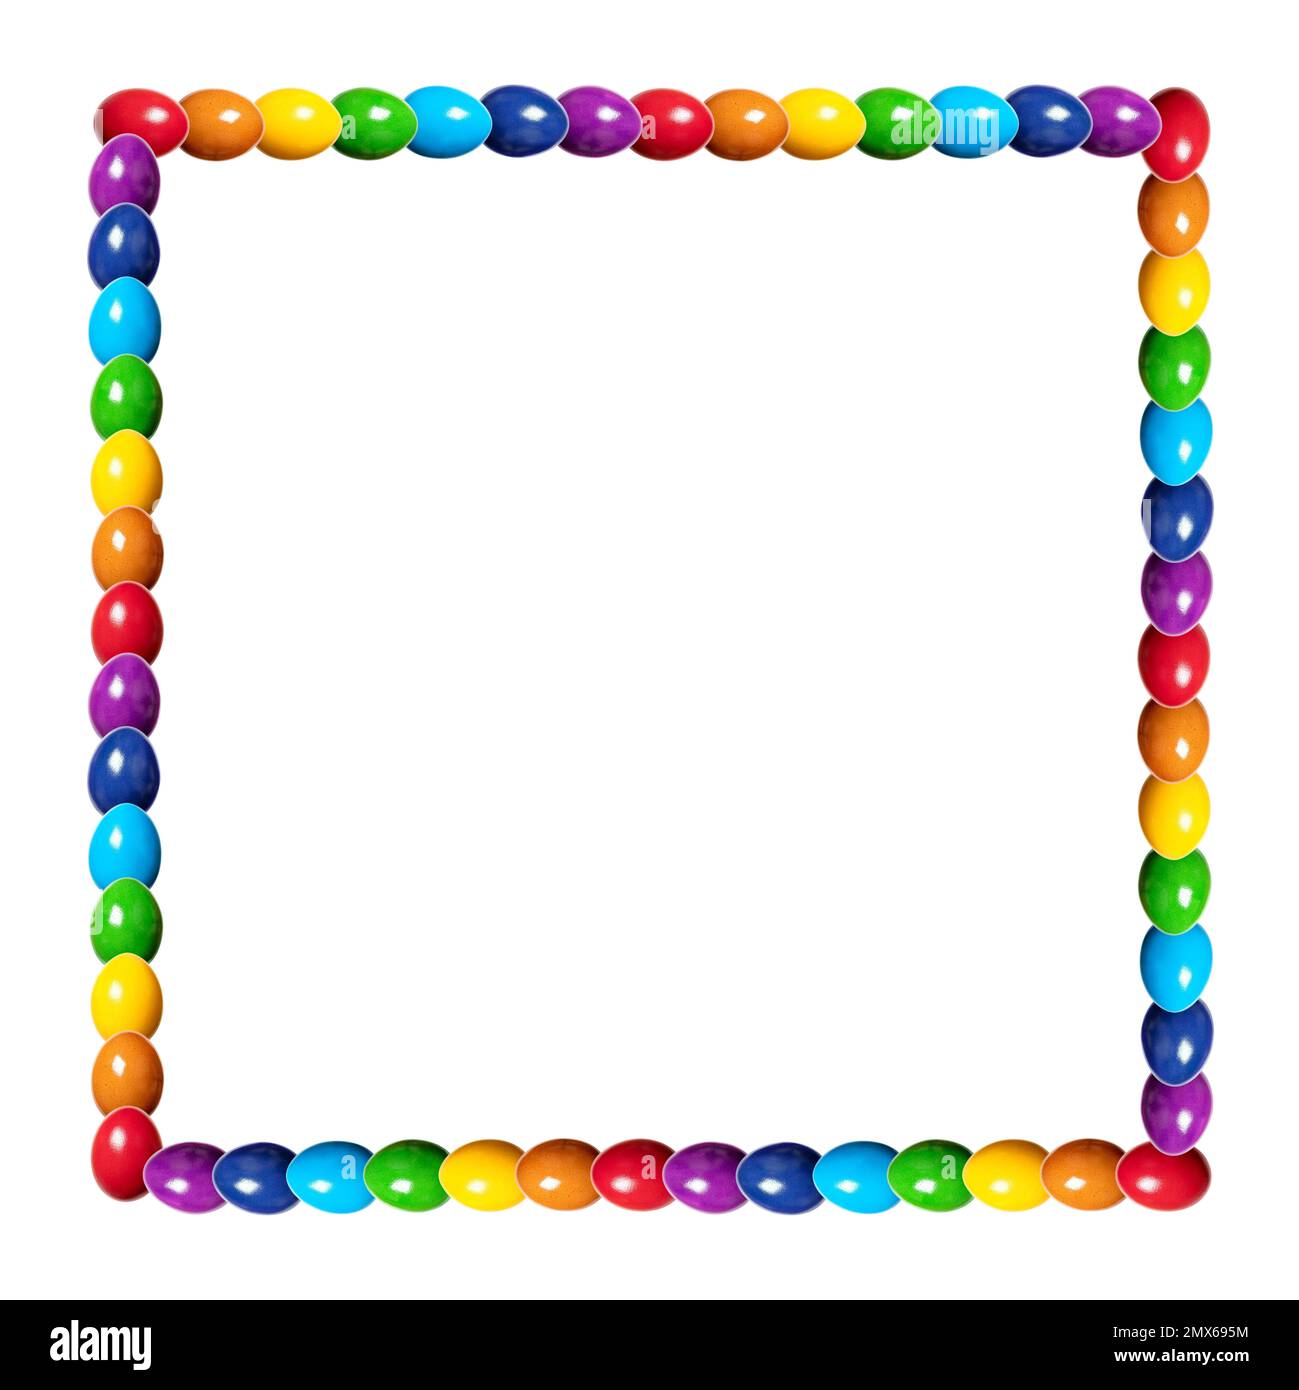 Square border made of rainbow colored eggs. Squared frame, made of multi colored, dyed chicken eggs. Traditionally used during Easter time as a gift. Stock Photo